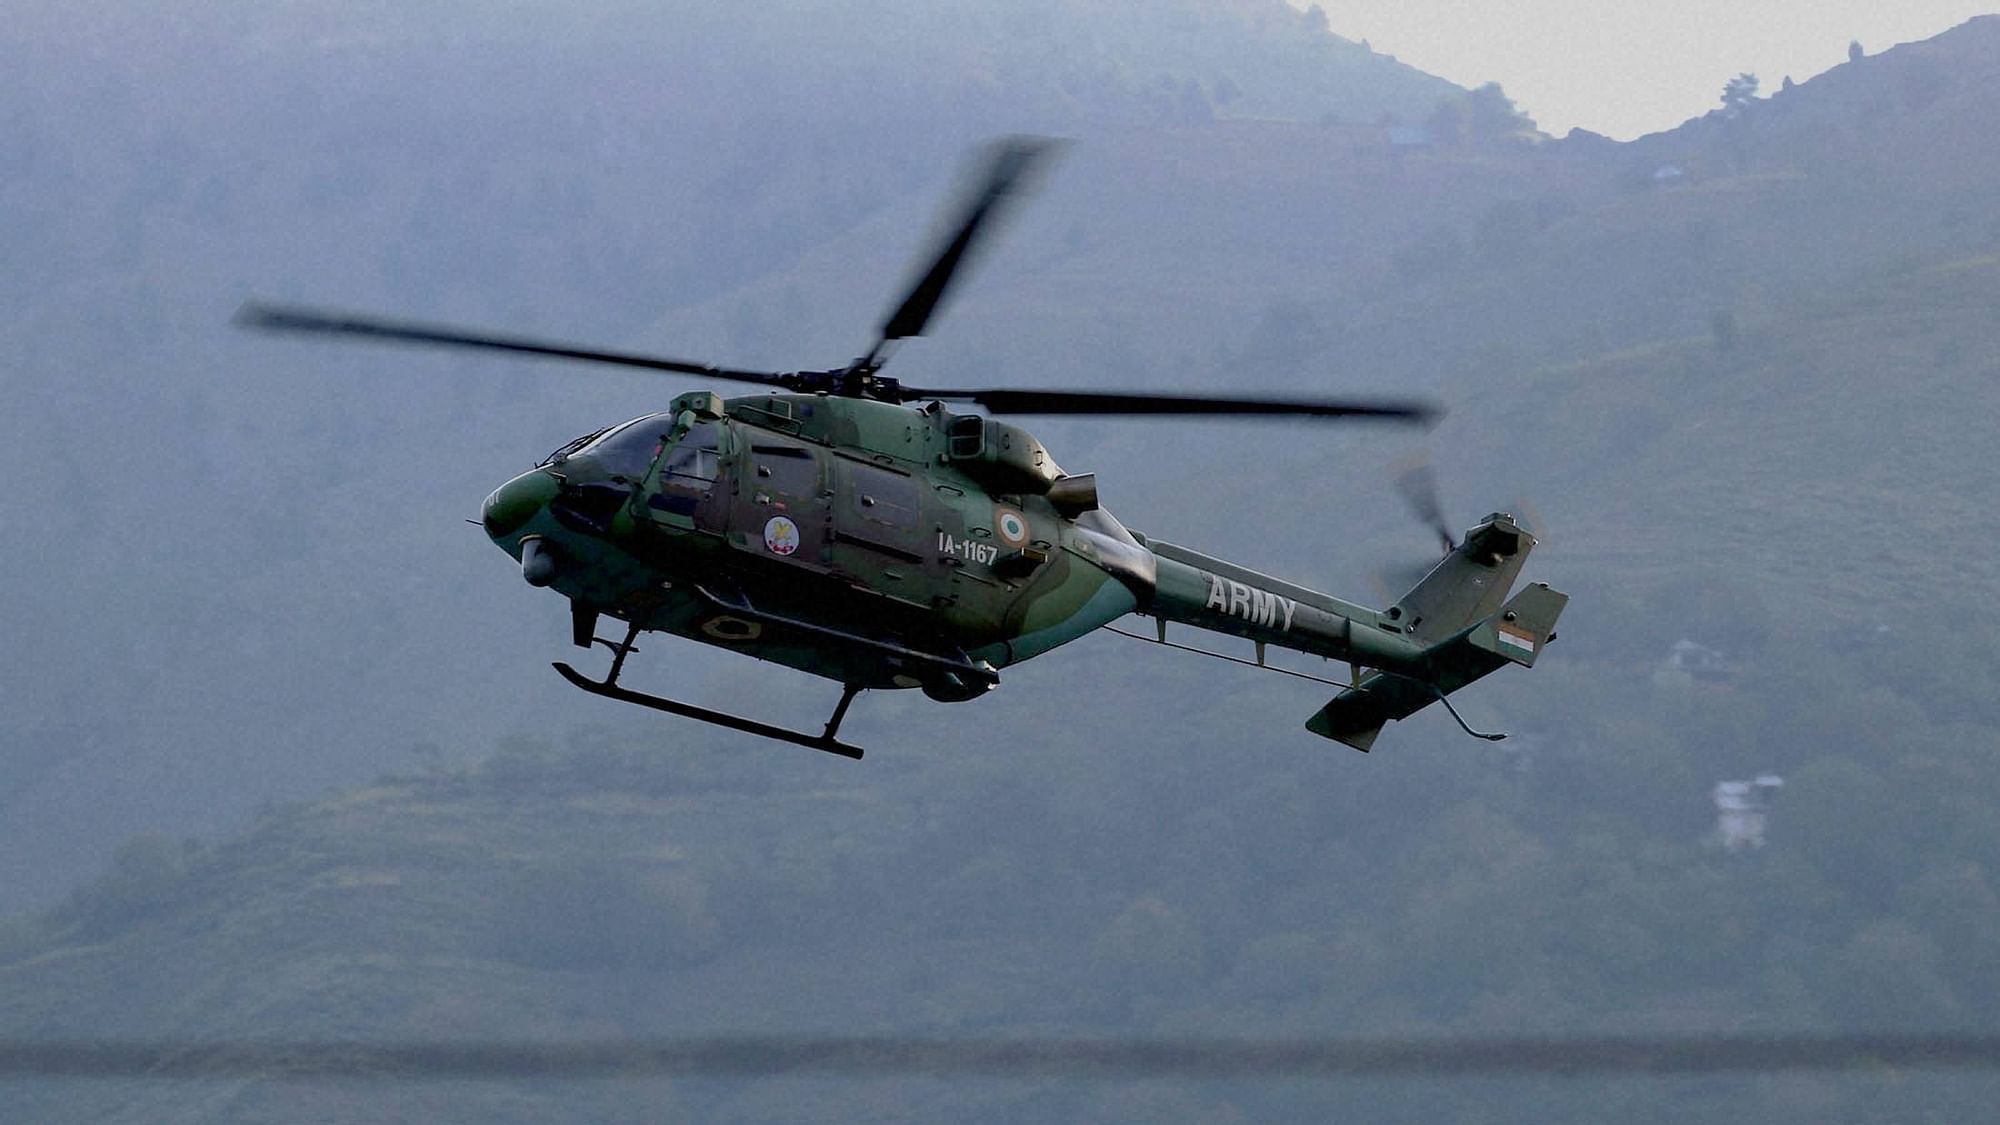 An Indian army helicopter flies above the army base which was attacked in the town of Uri, west of Srinagar. (Photo: AP)